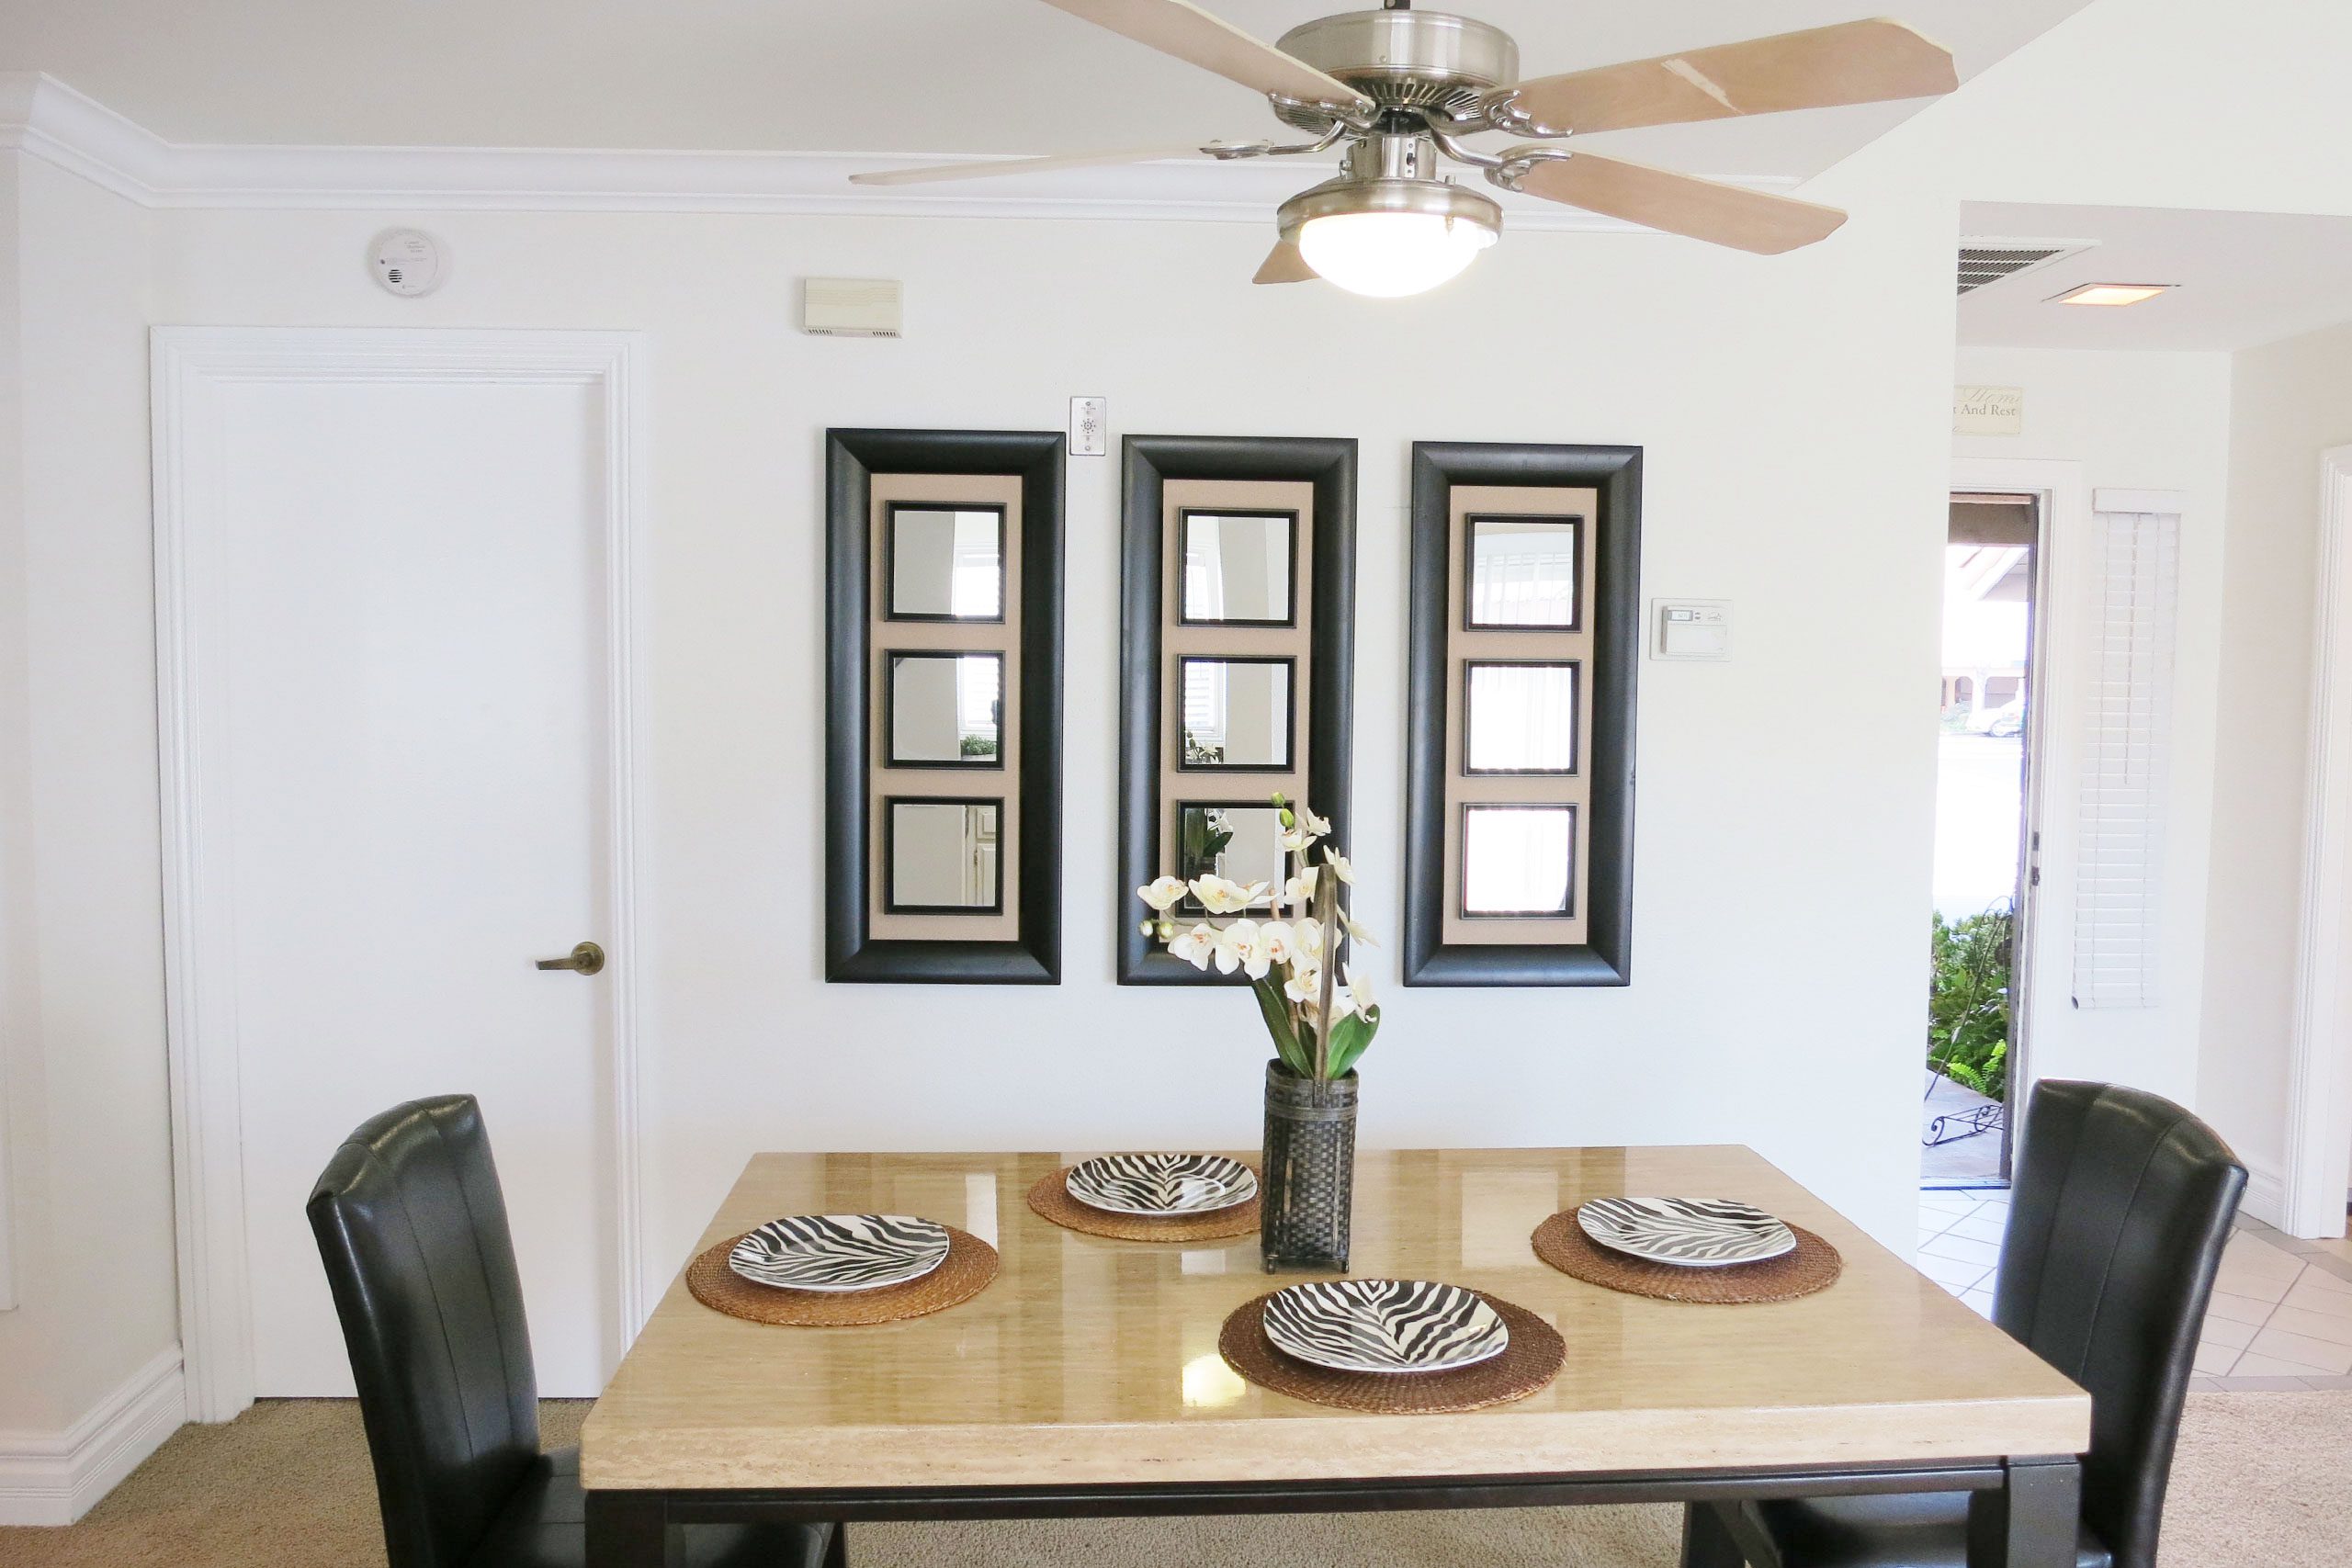 Two Bedroom Apartments in Anaheim CA - Le Med - Dining Room with a Dining Table with Plates, Flowers, a Ceiling Fan, and Plush Carpet